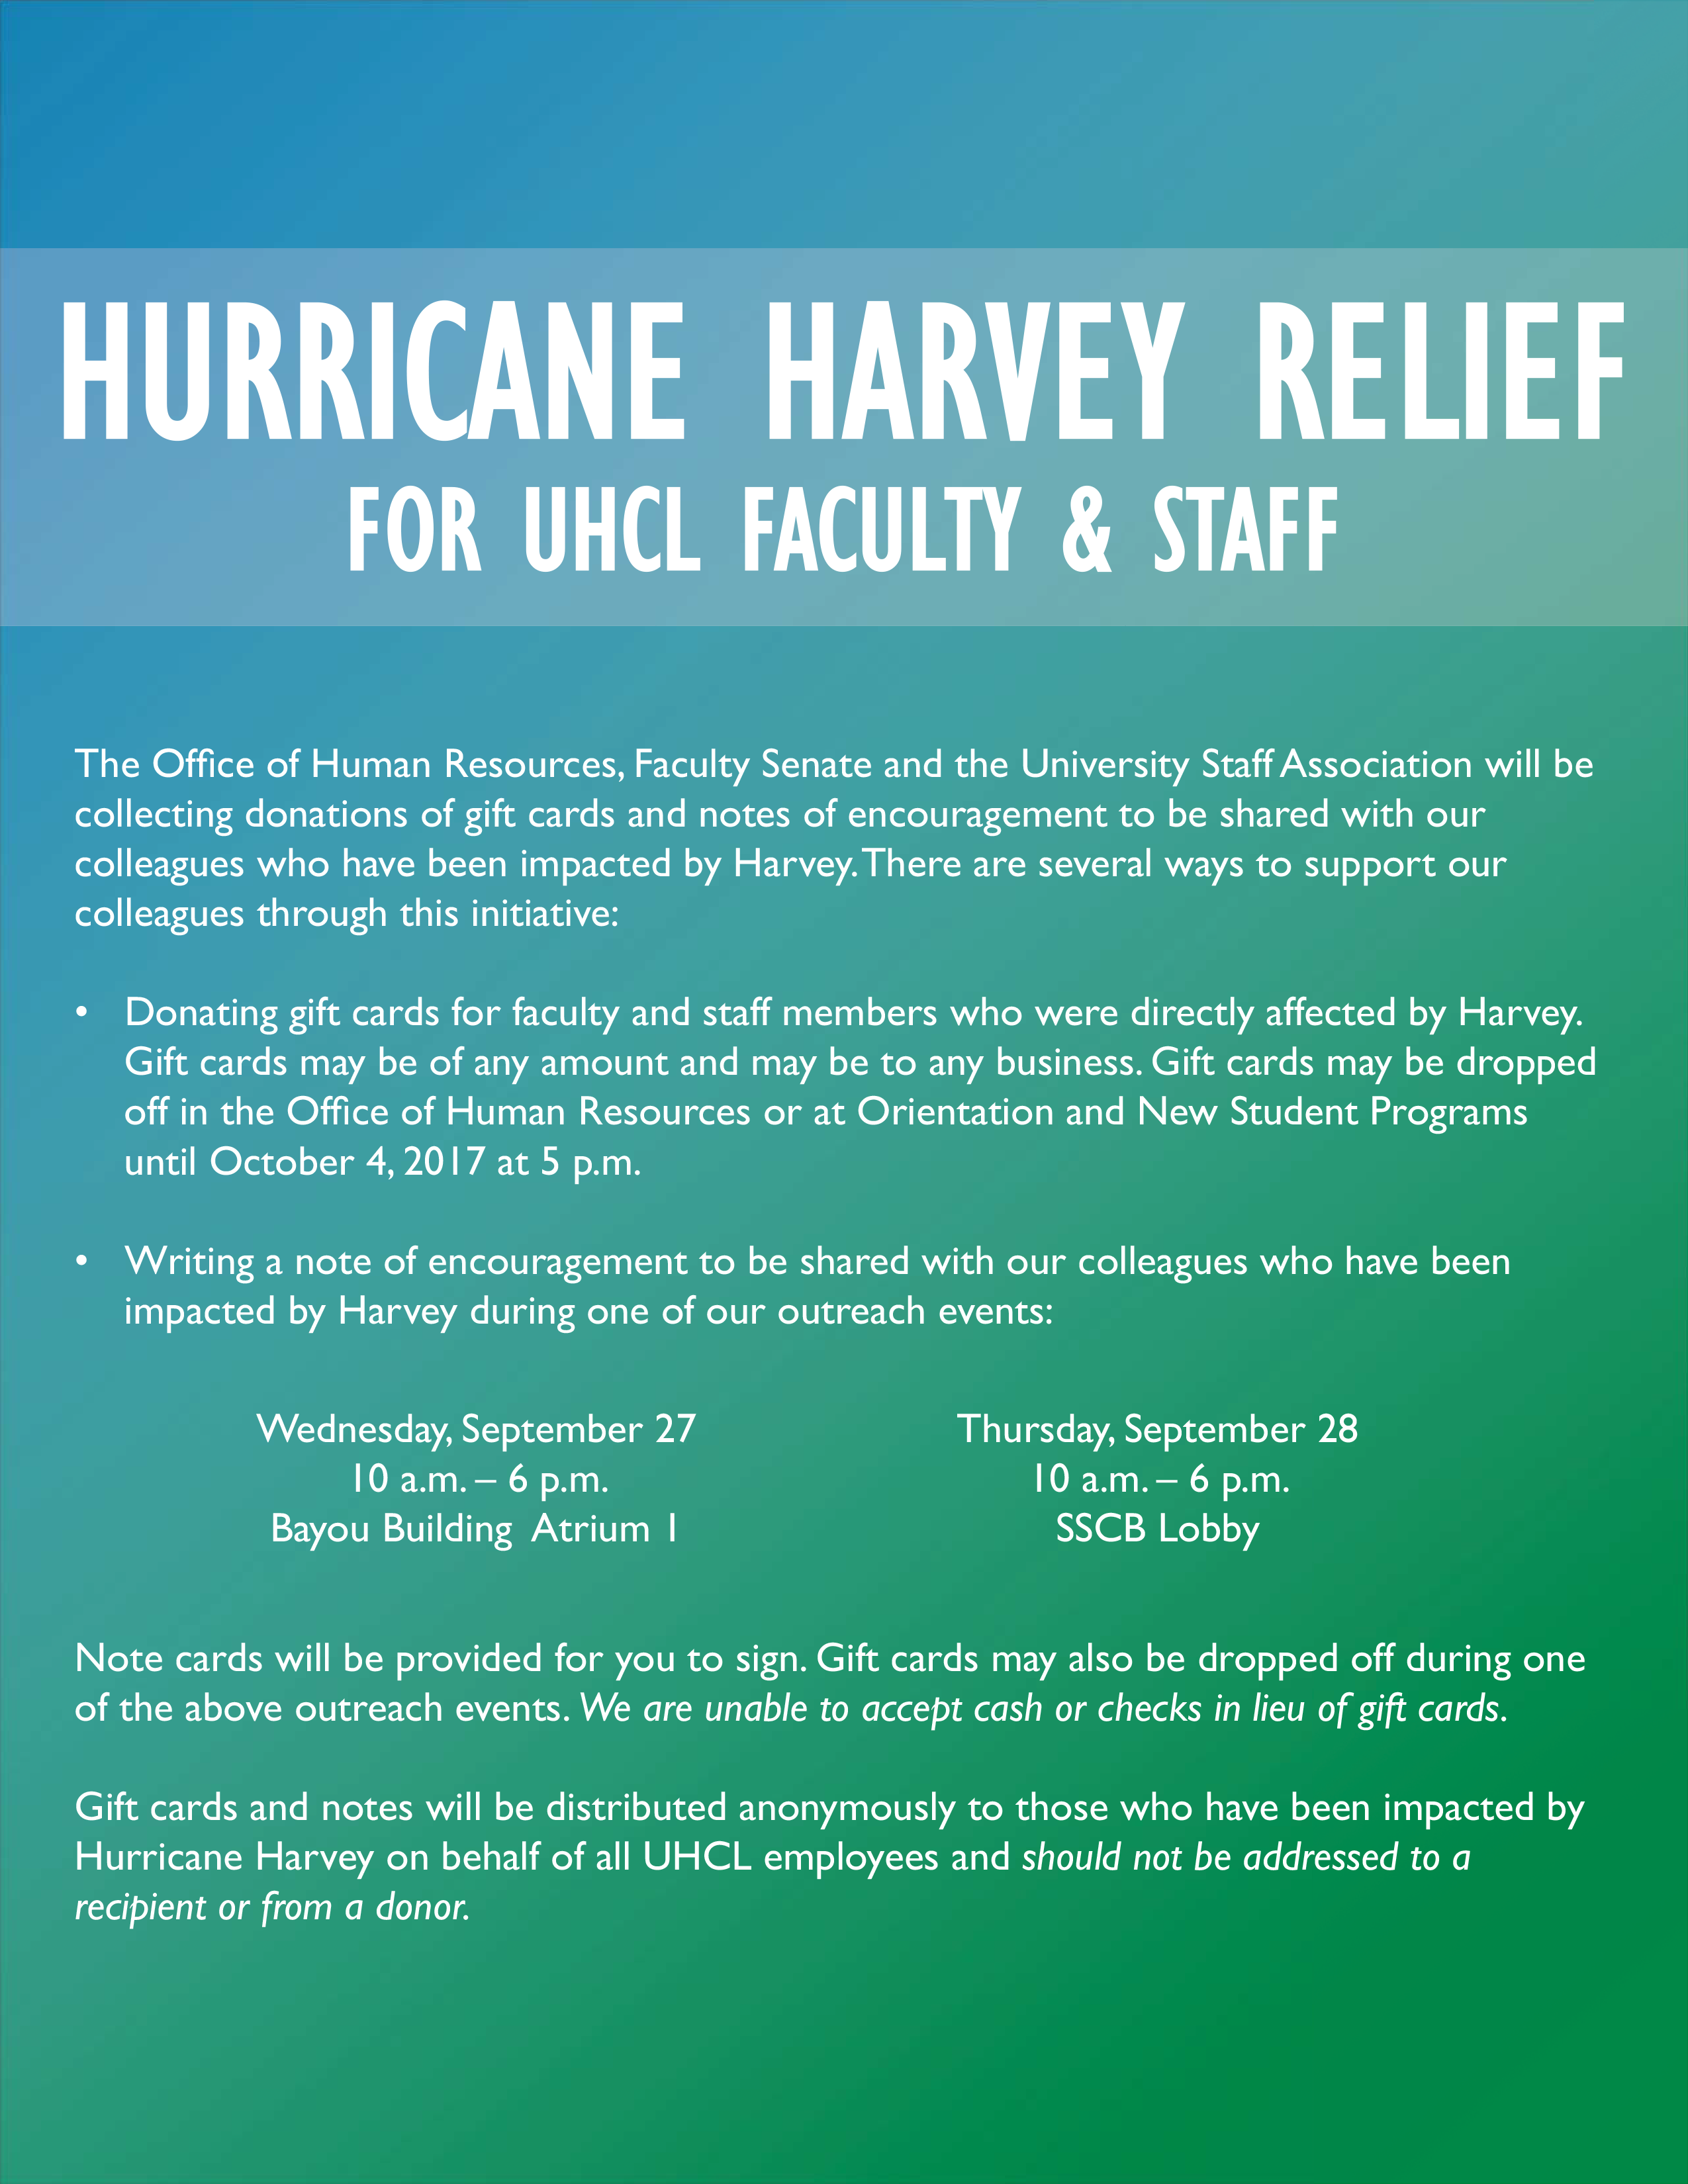 PHOTO: Informational flyer for UHCL employee Hurricane Harvey relief. Photo courtesy of the Office of Human Resources, Faculty Senate and the University Staff Association.